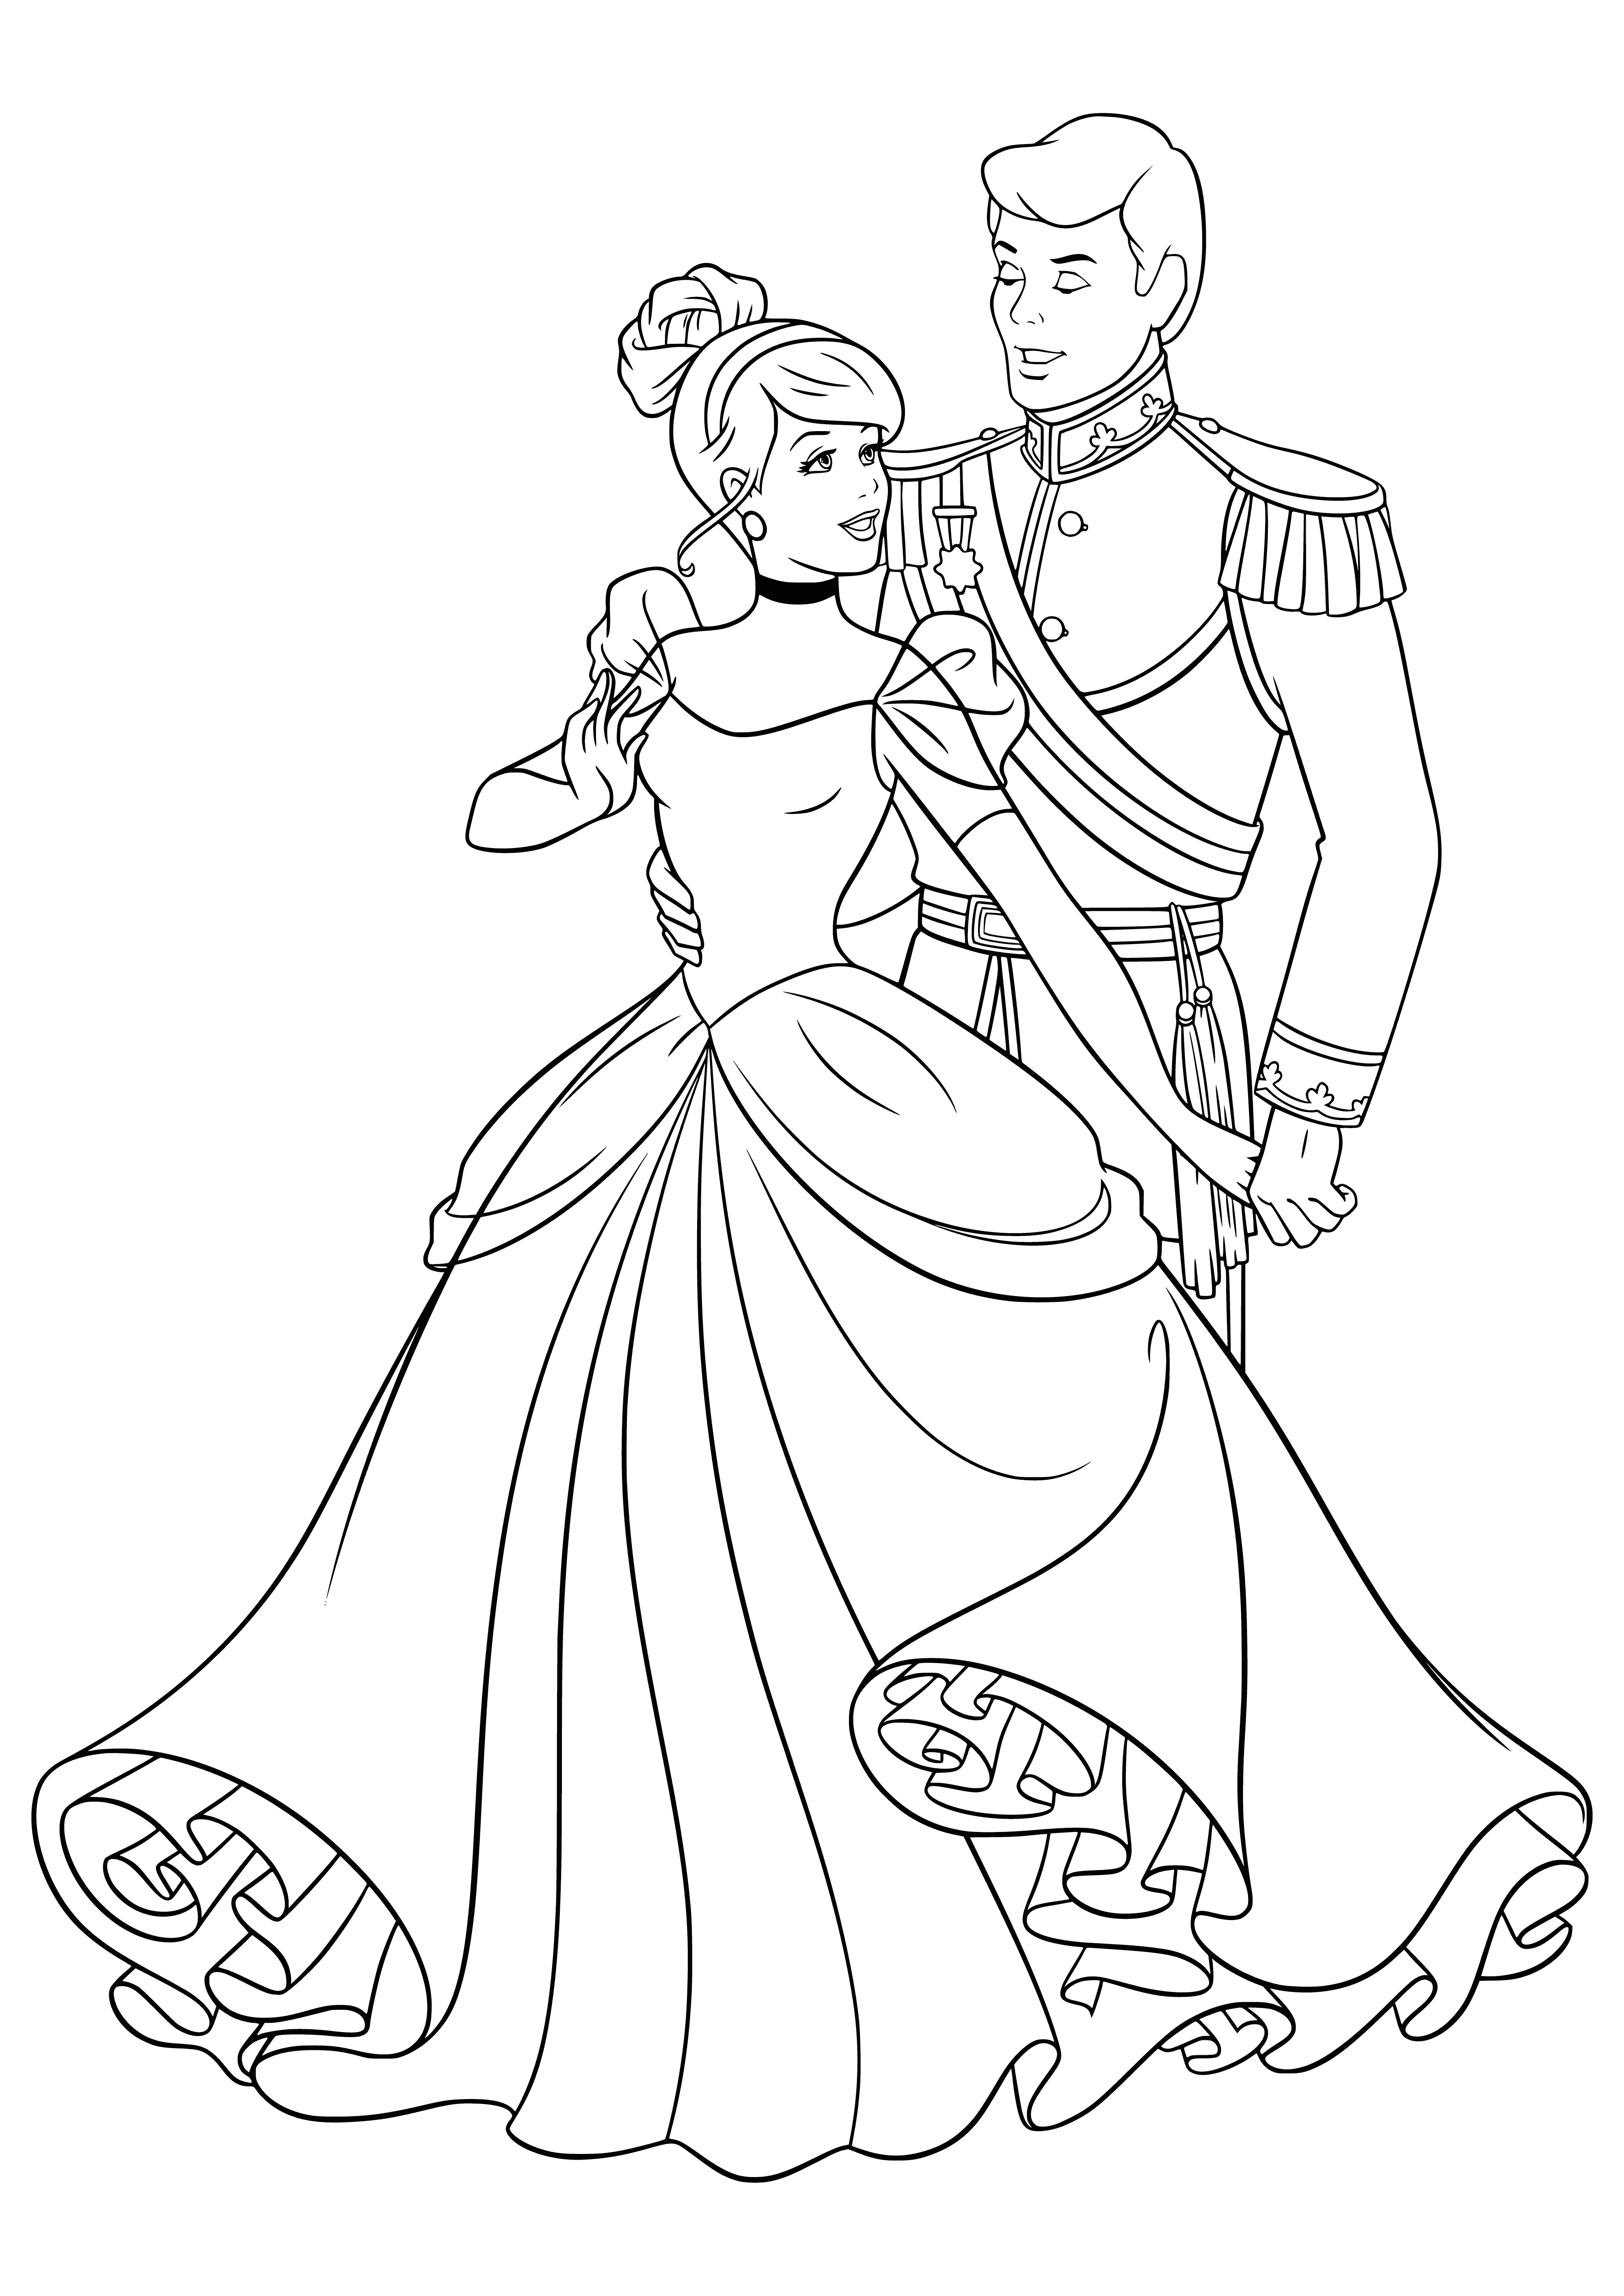 coloring page: Cinderella & prince happily together on stairs. He holds her hand & she smiles.